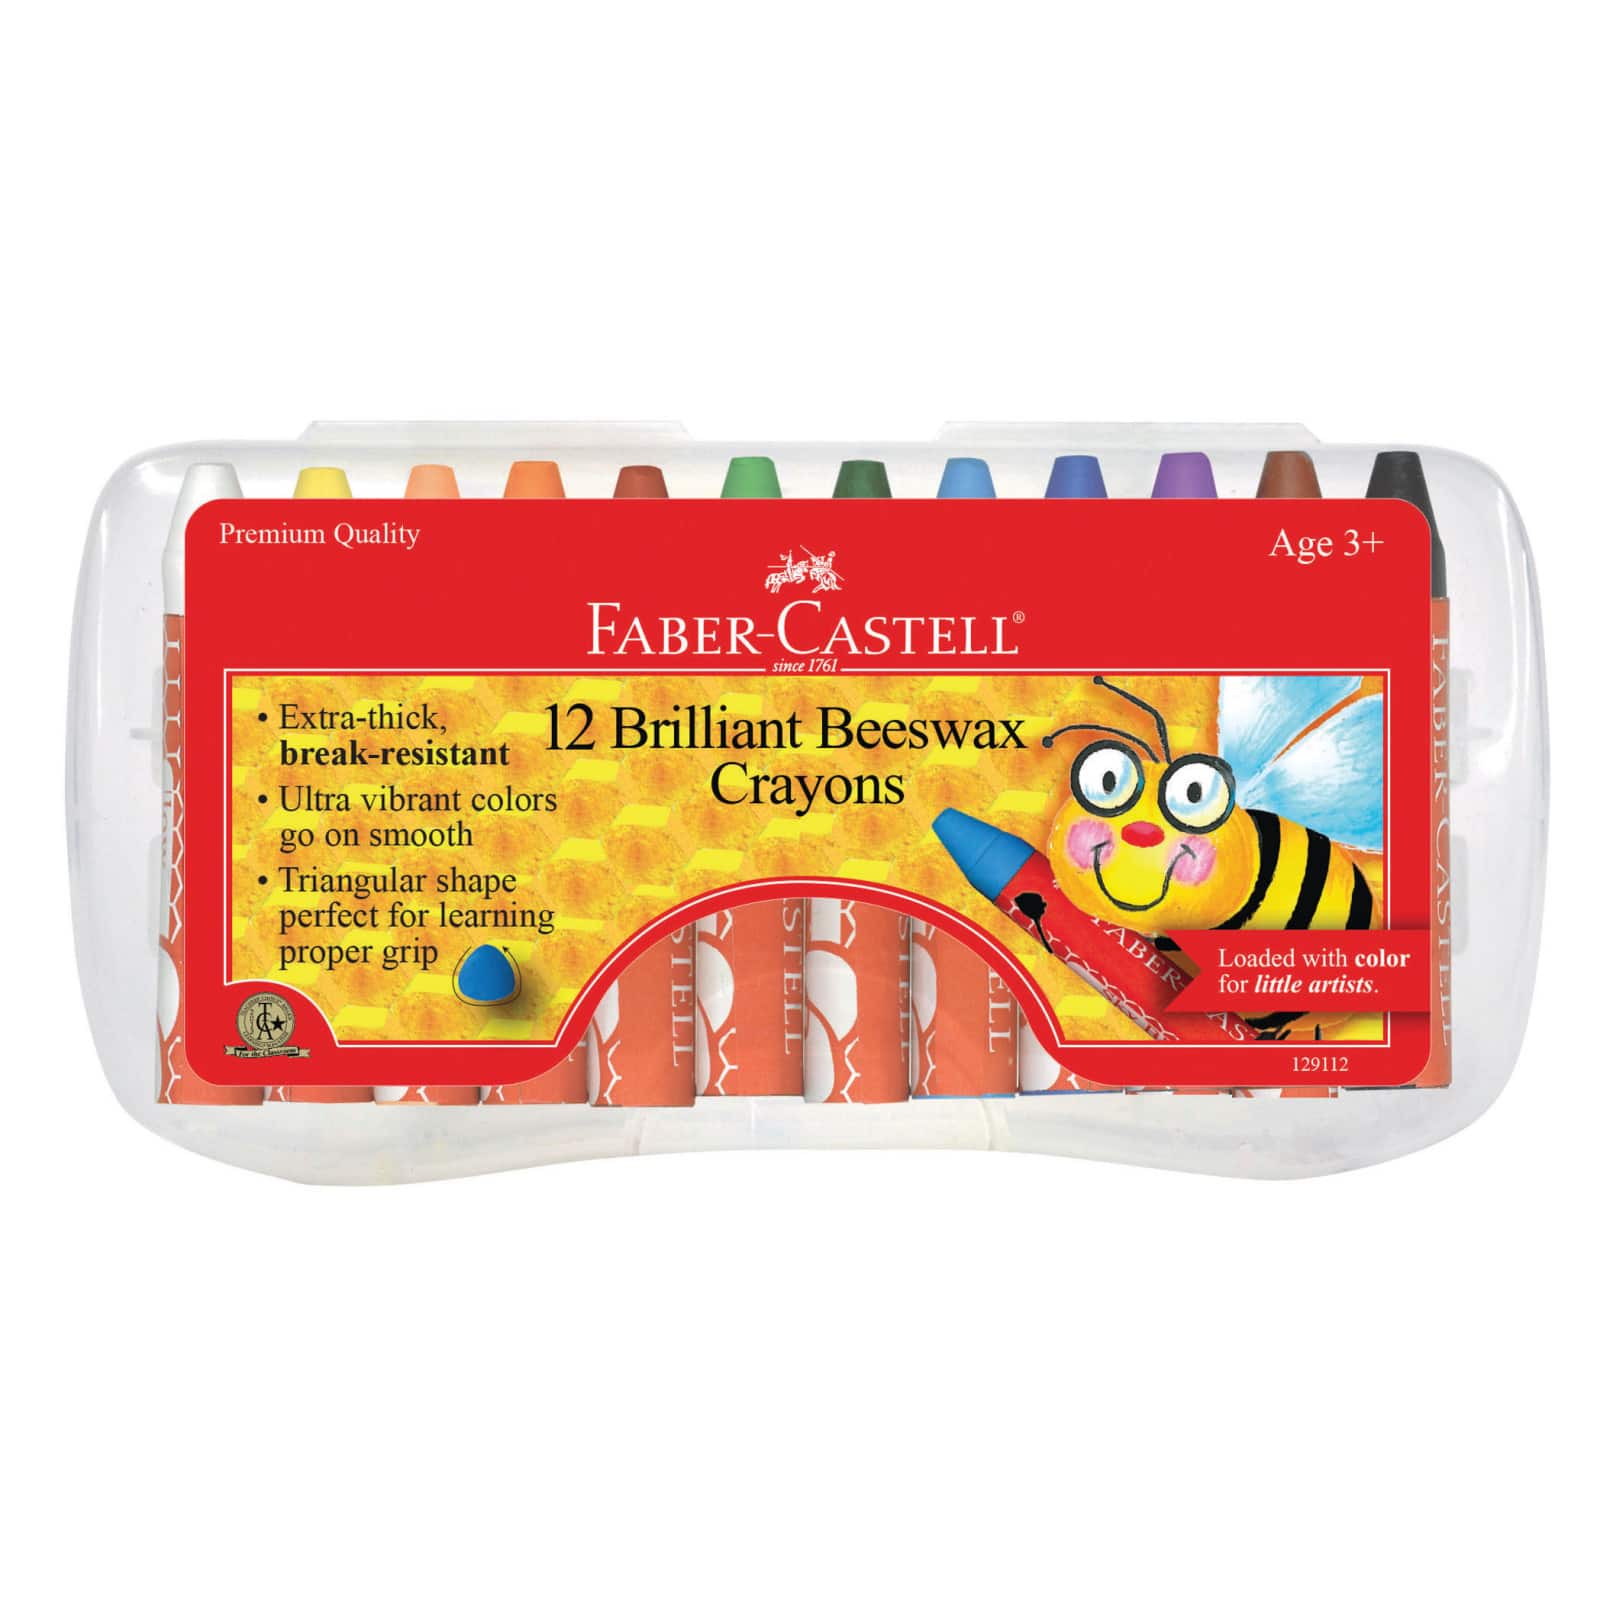 Faber-Castell Jumbo Beeswax Crayon Sets